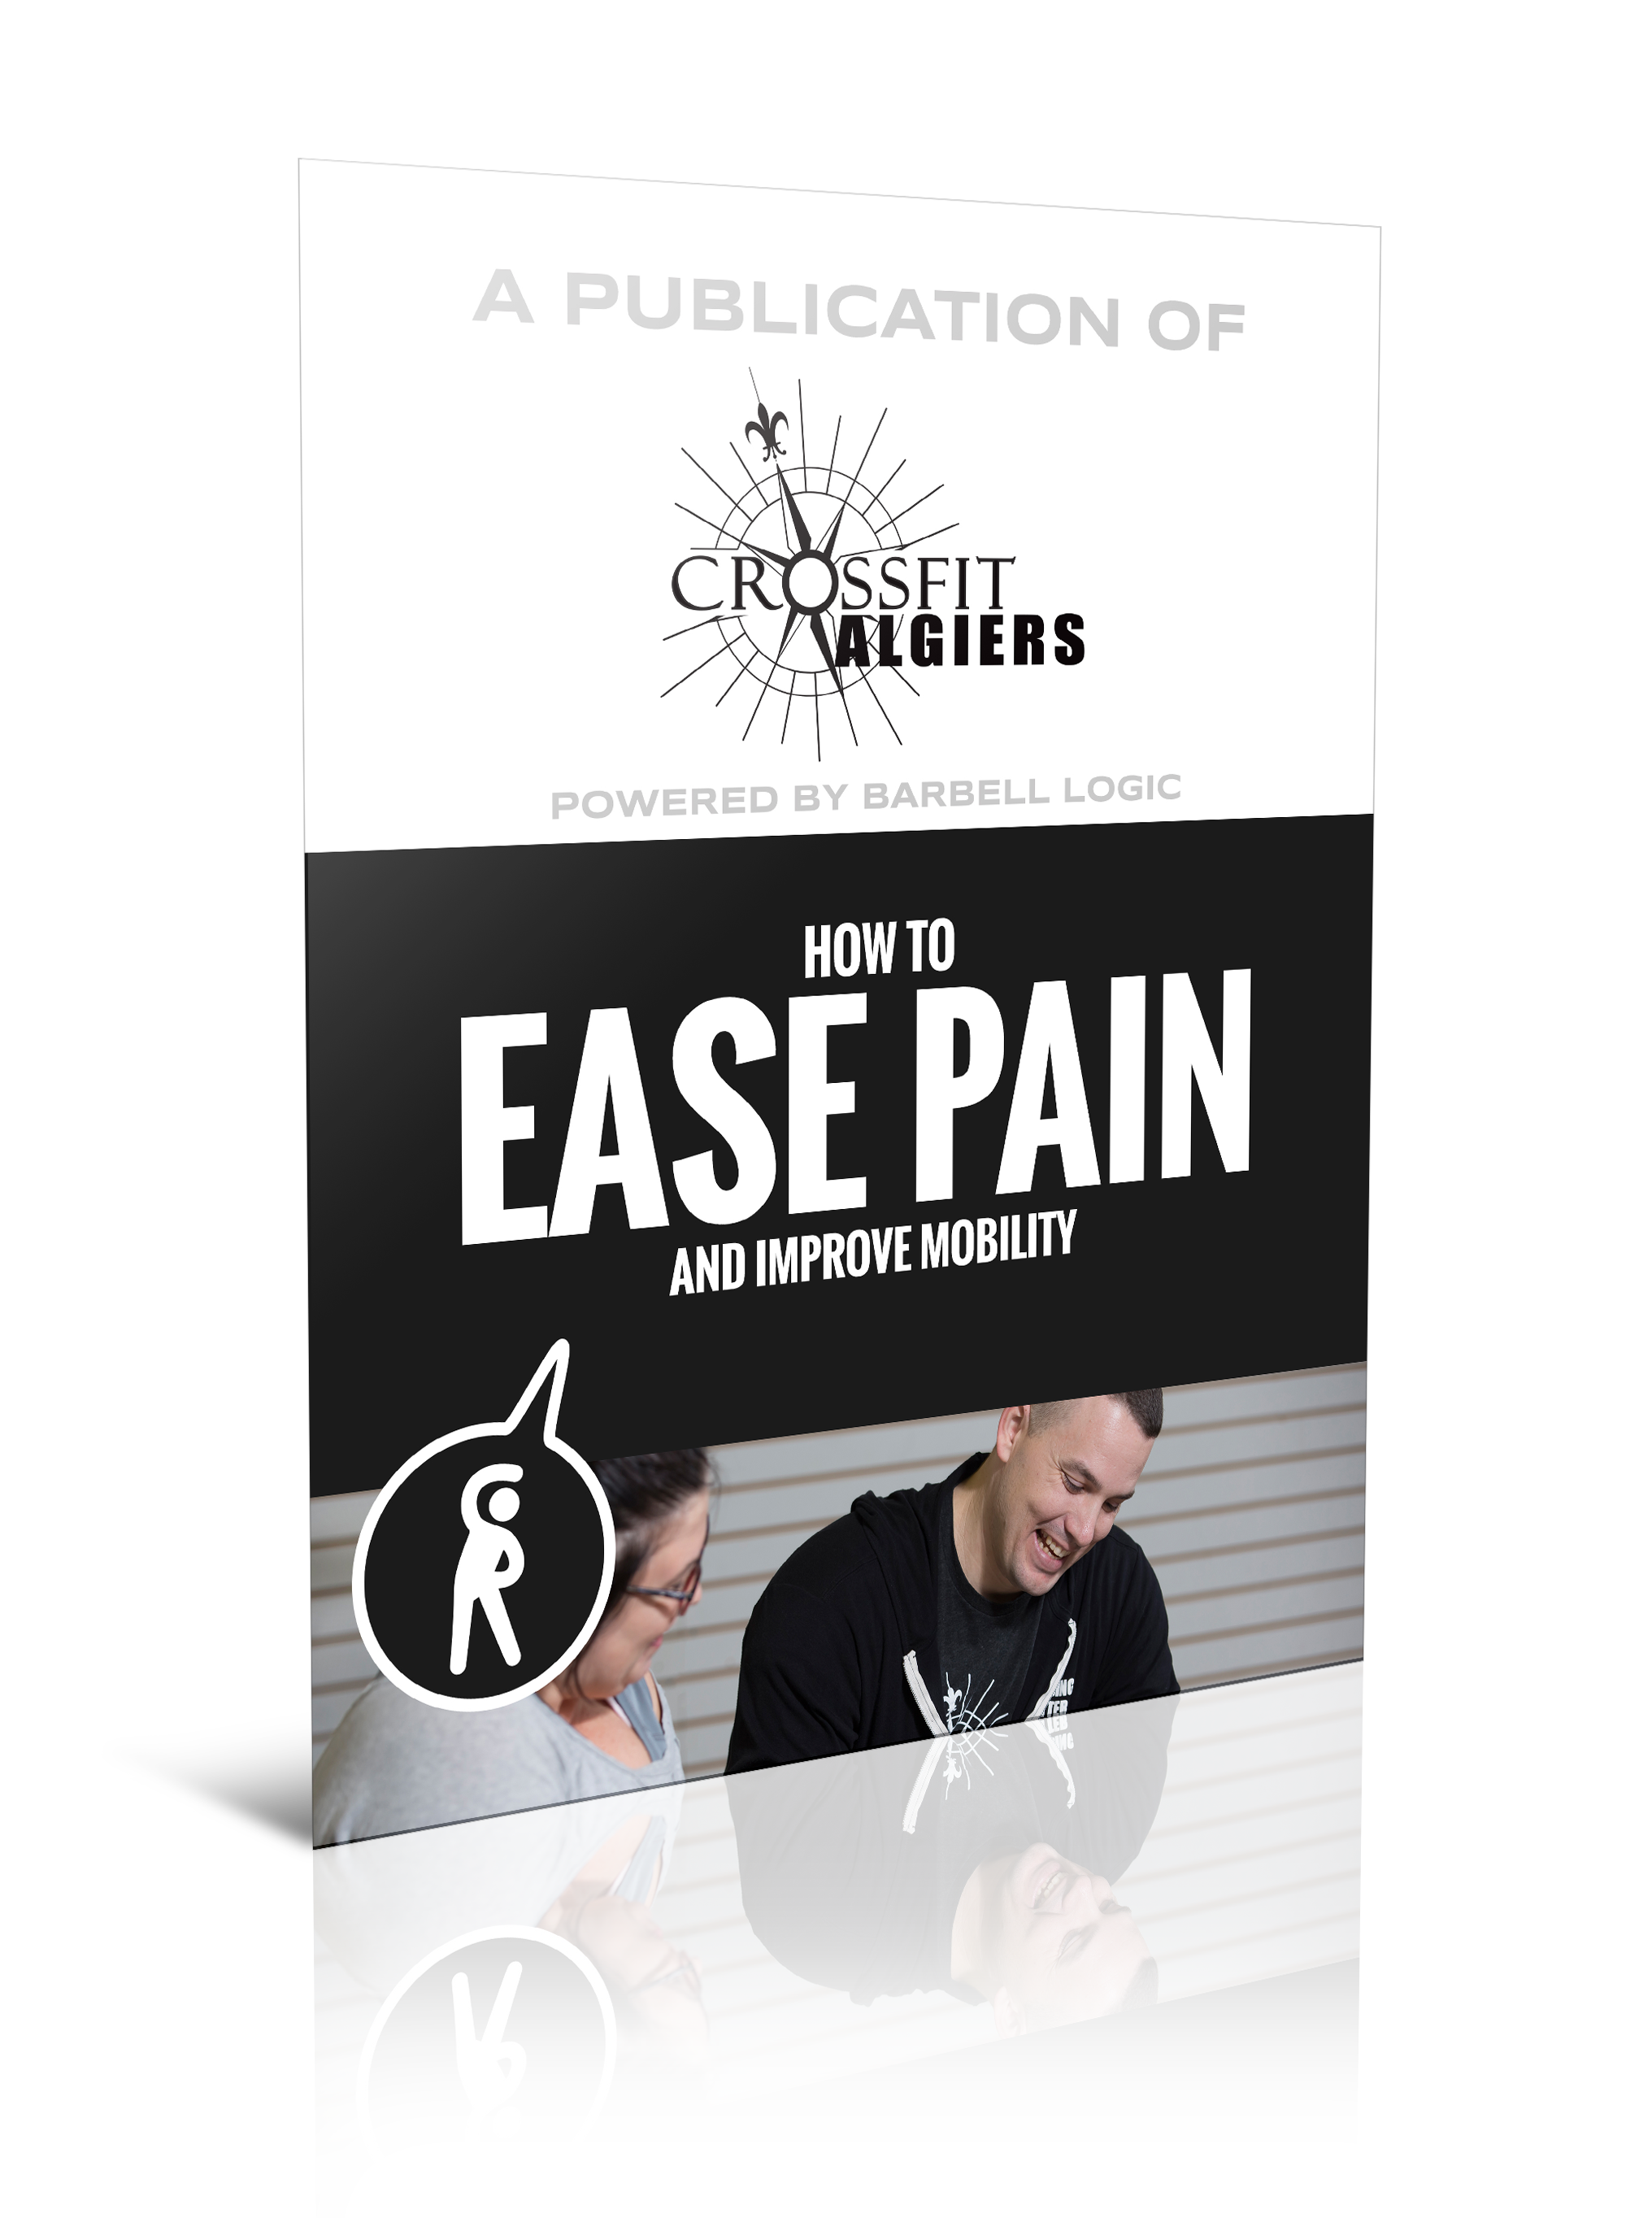 functional fitness ebook